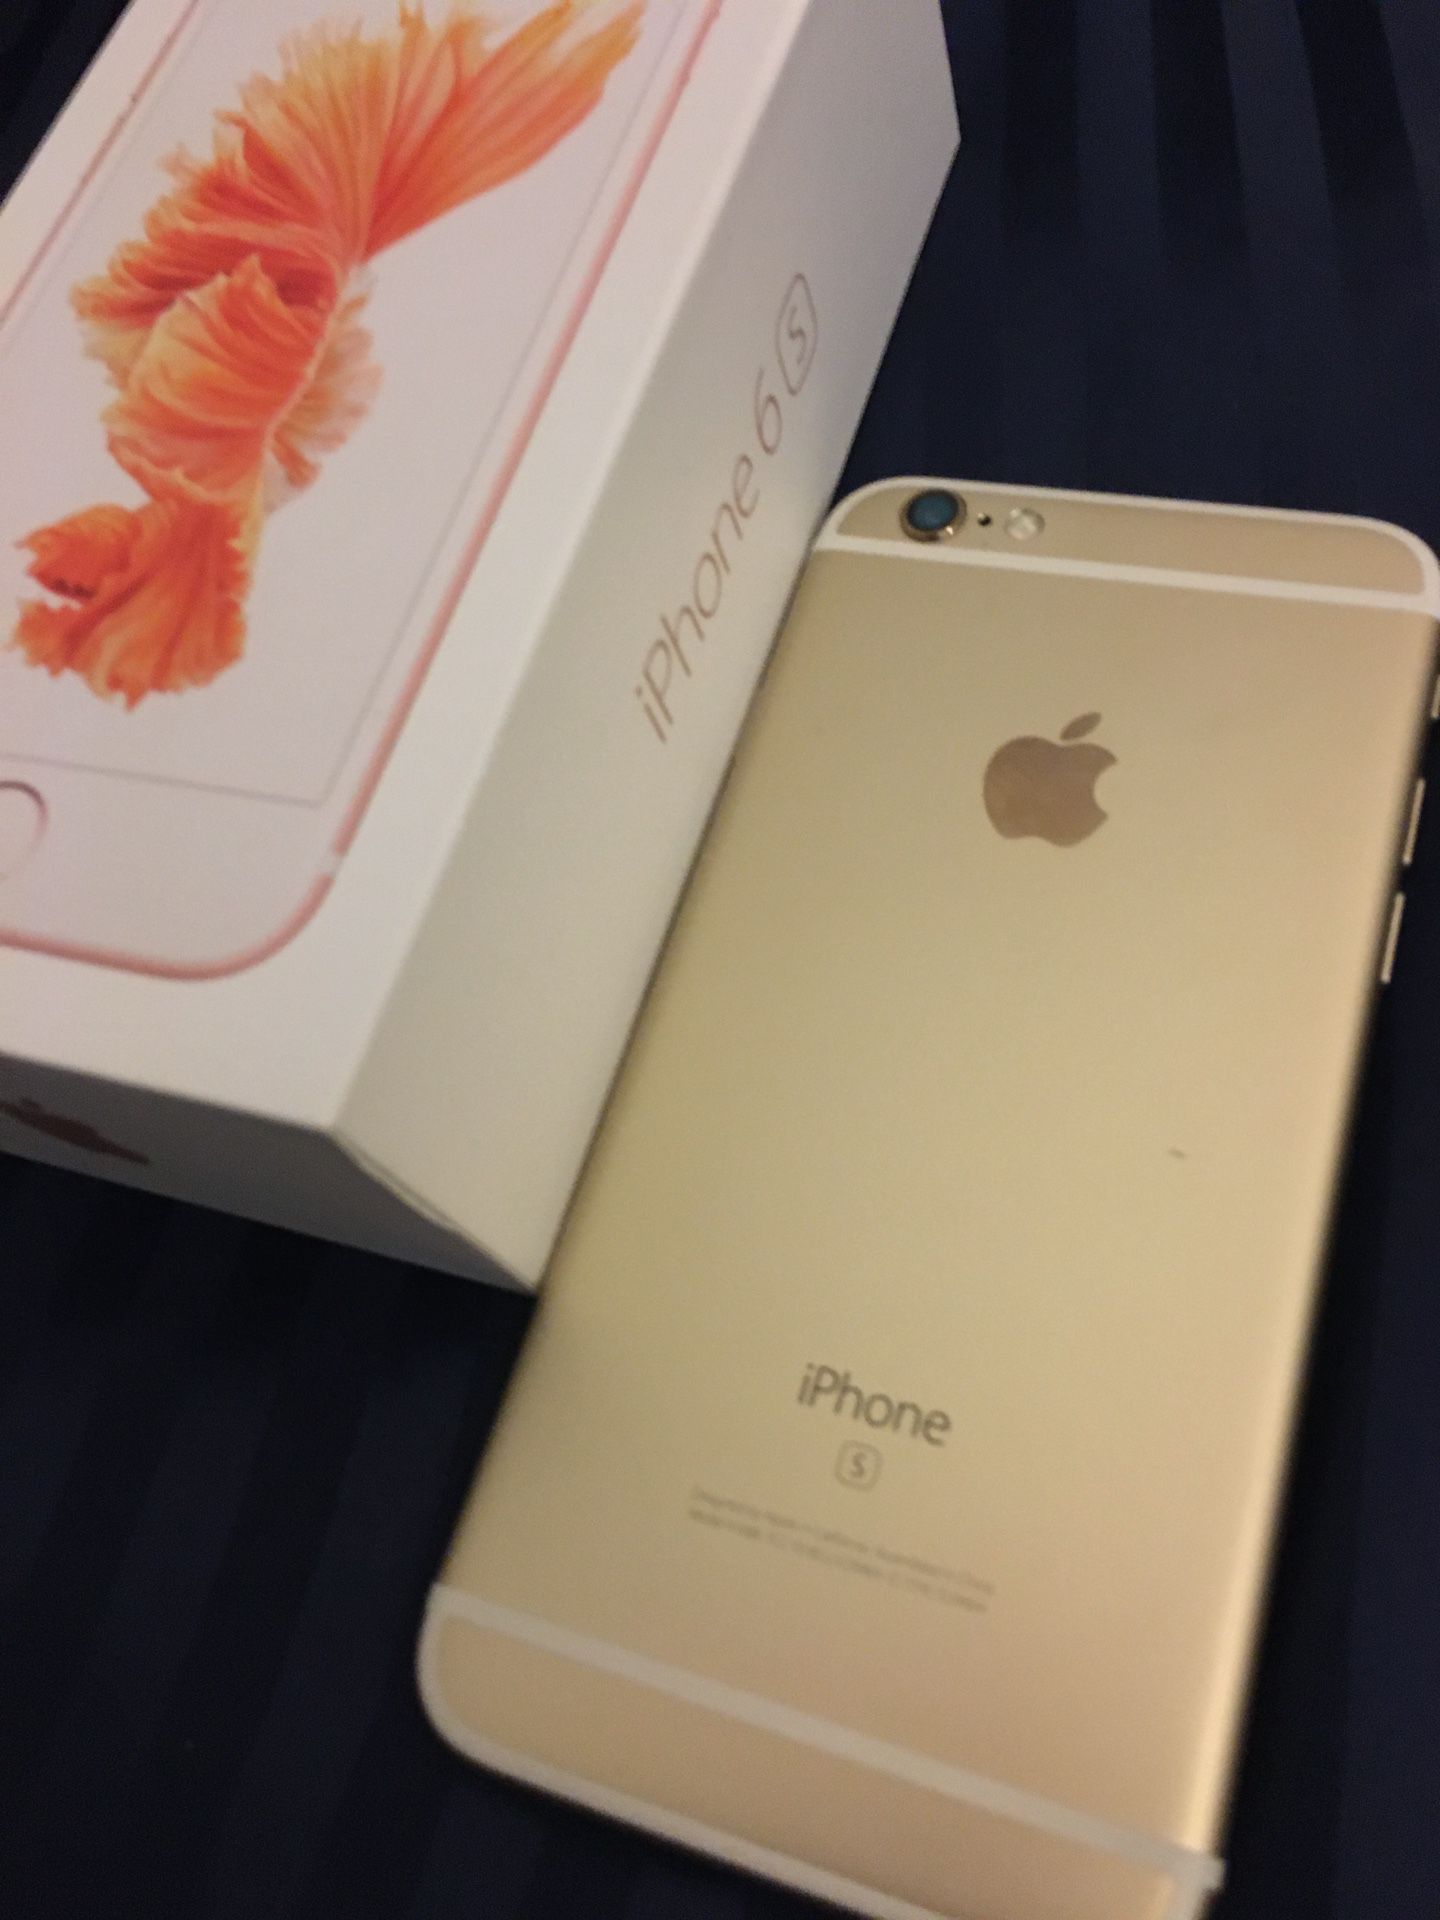 iPhone 6s /64gb / Unlocked any carrier.